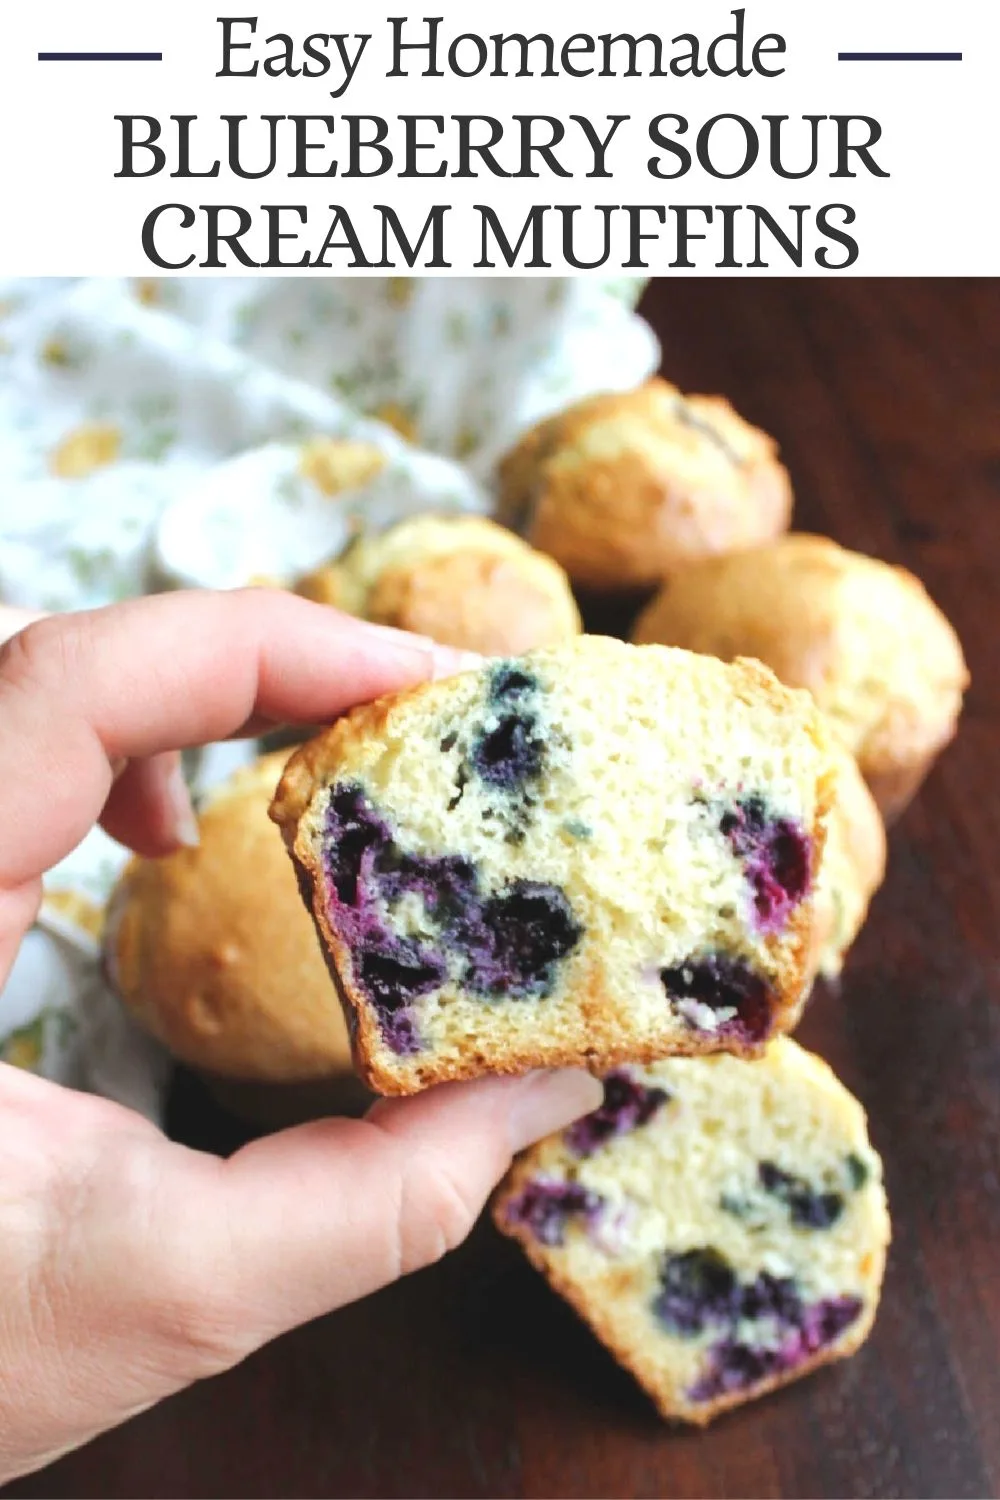 Blueberry sour cream muffins have a great texture and big blueberry flavor. They are easy to make and are perfect for a grab and go breakfast or brunch sweet.